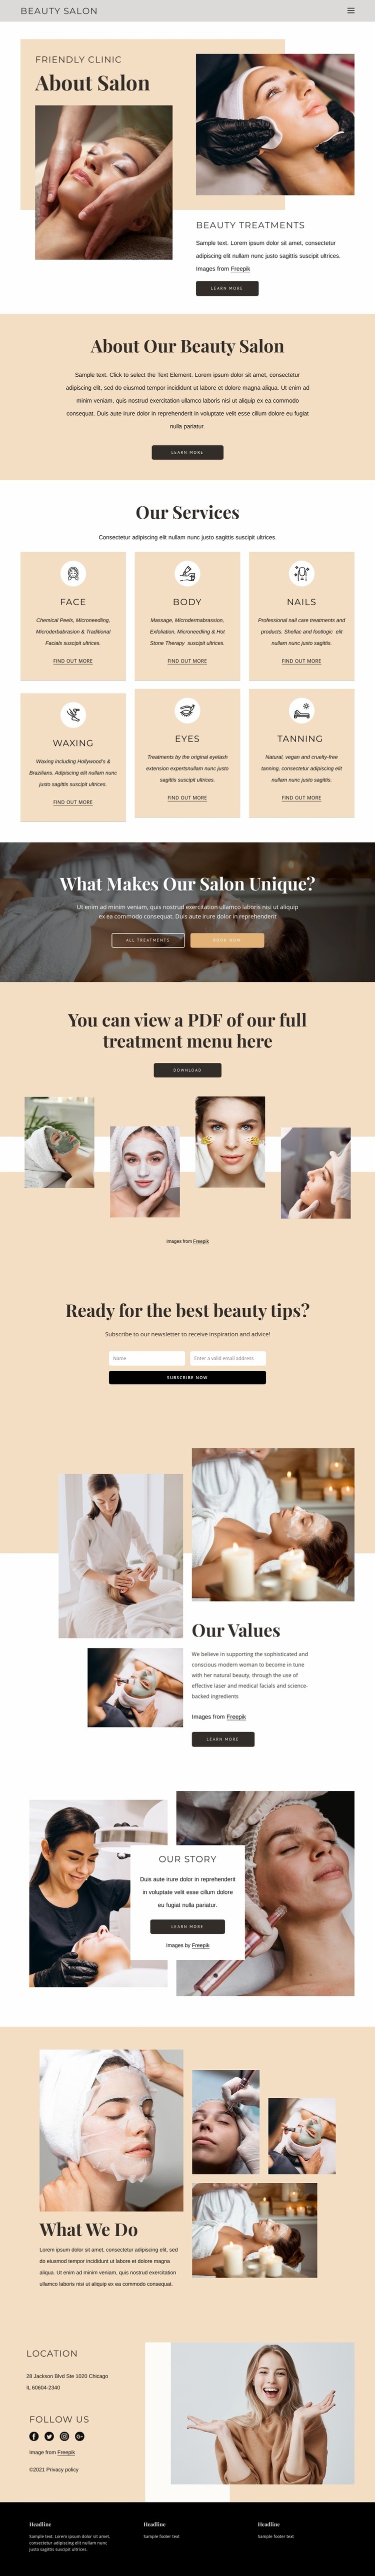 Beauty and aesthetic treatments Web Page Design